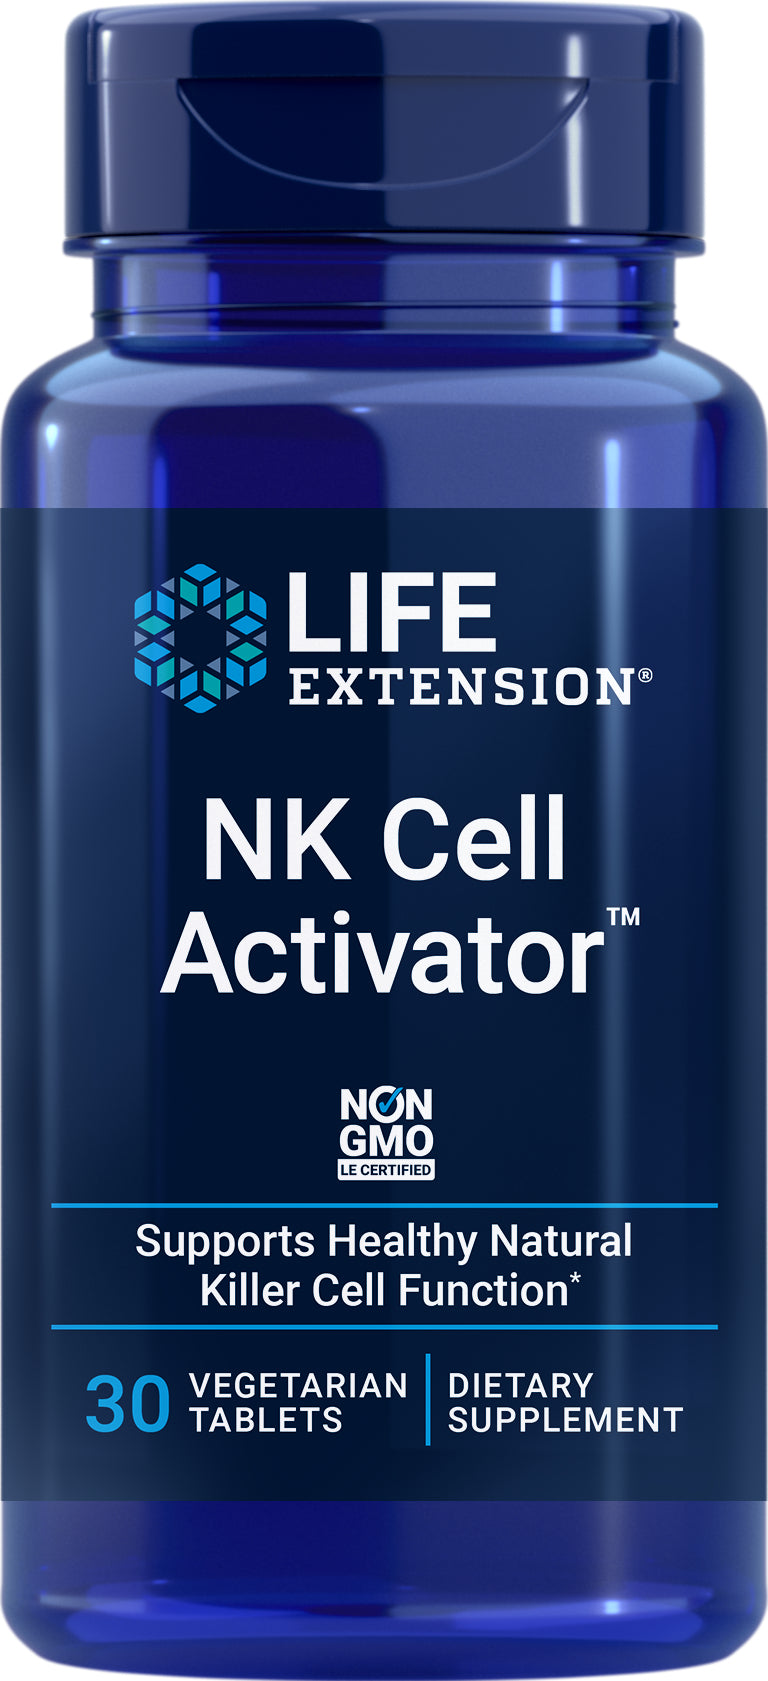 NK Cell Activator™200 mg, 30 vegetarian capsules by Life Extension